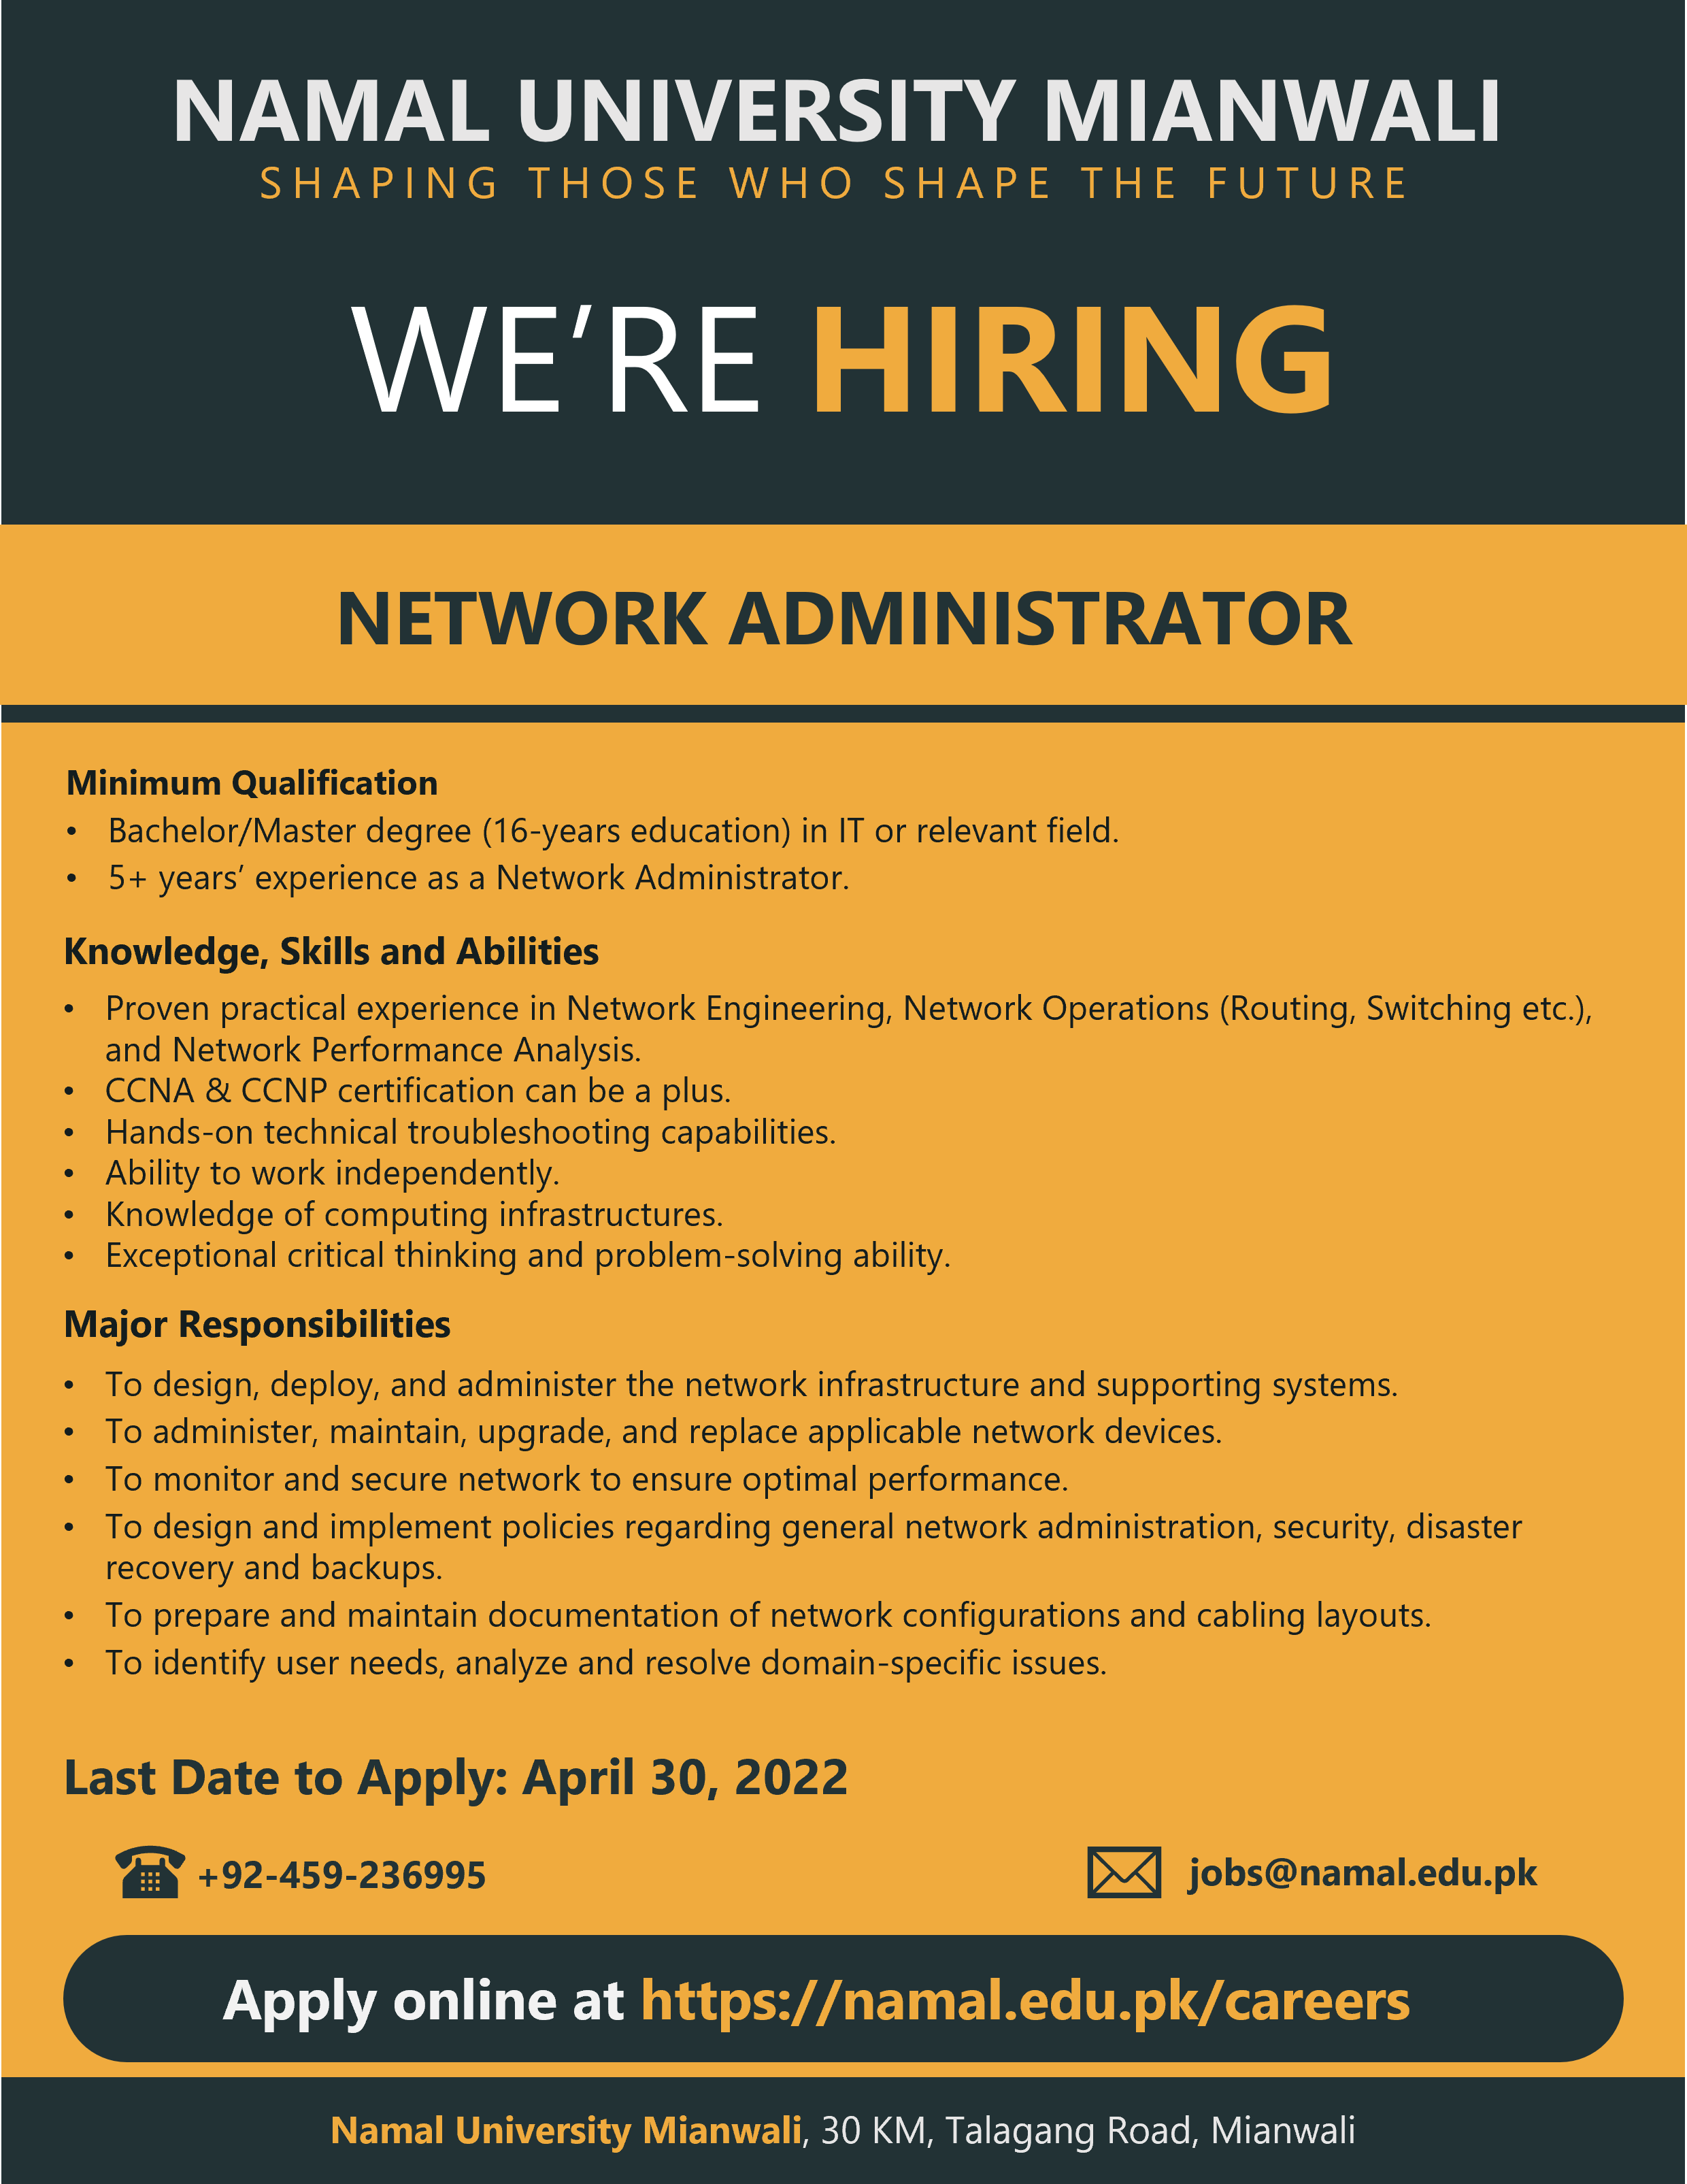 We are hiring!! NETWORK ADMINISTRATOR